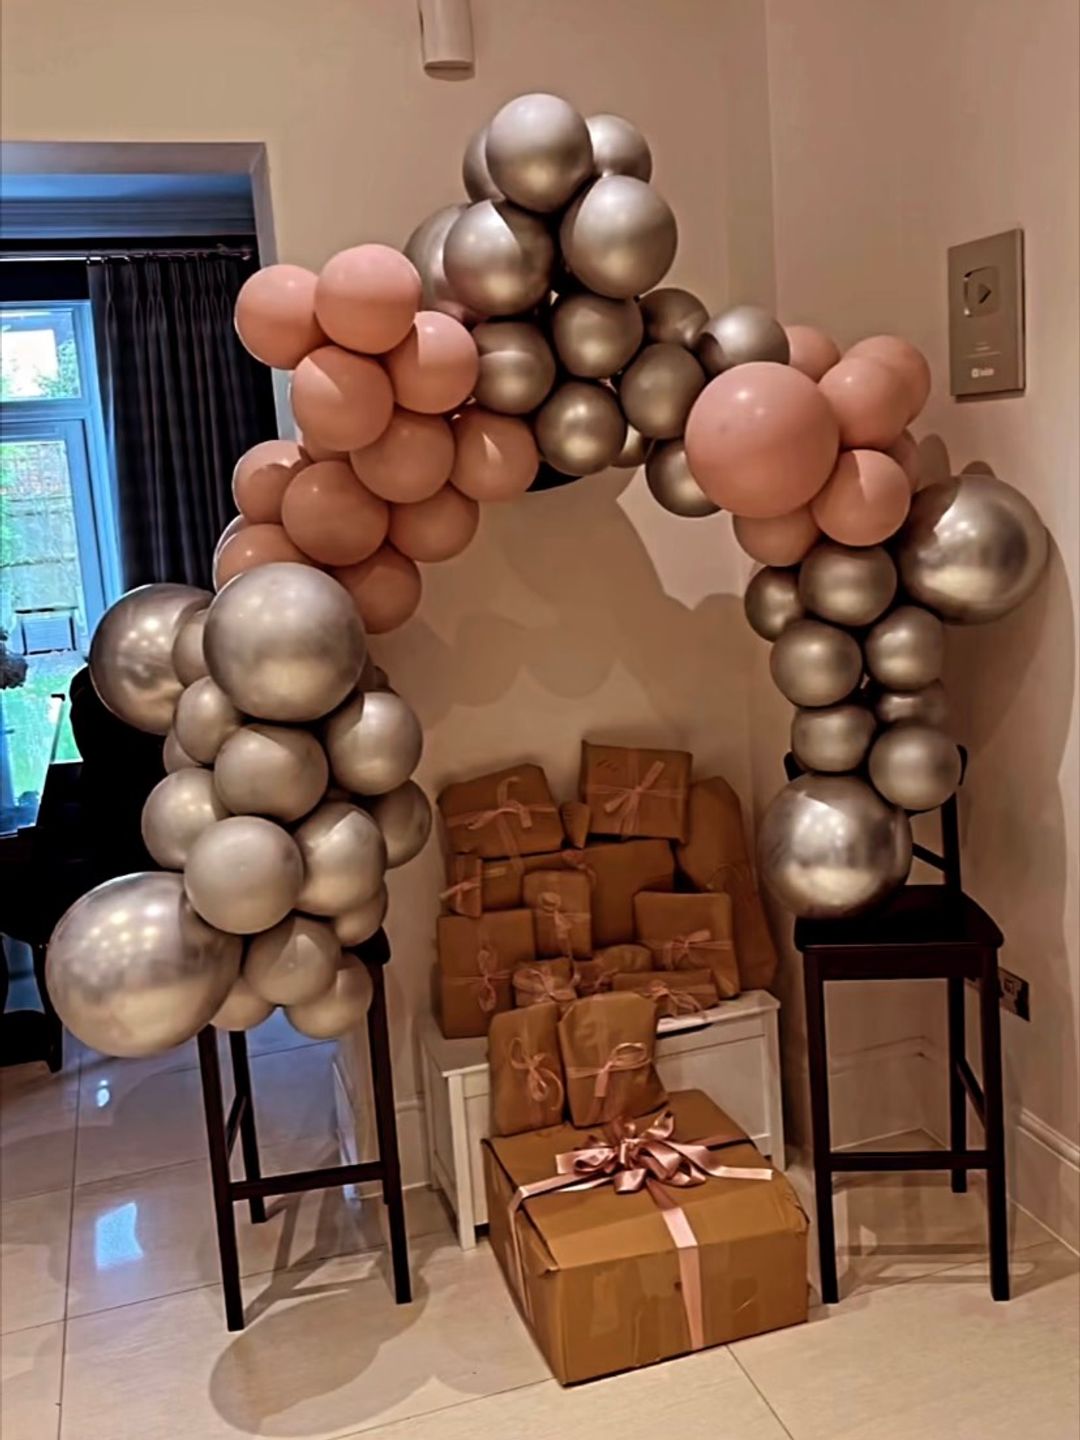 Millie's presents surrounded by a balloon arch